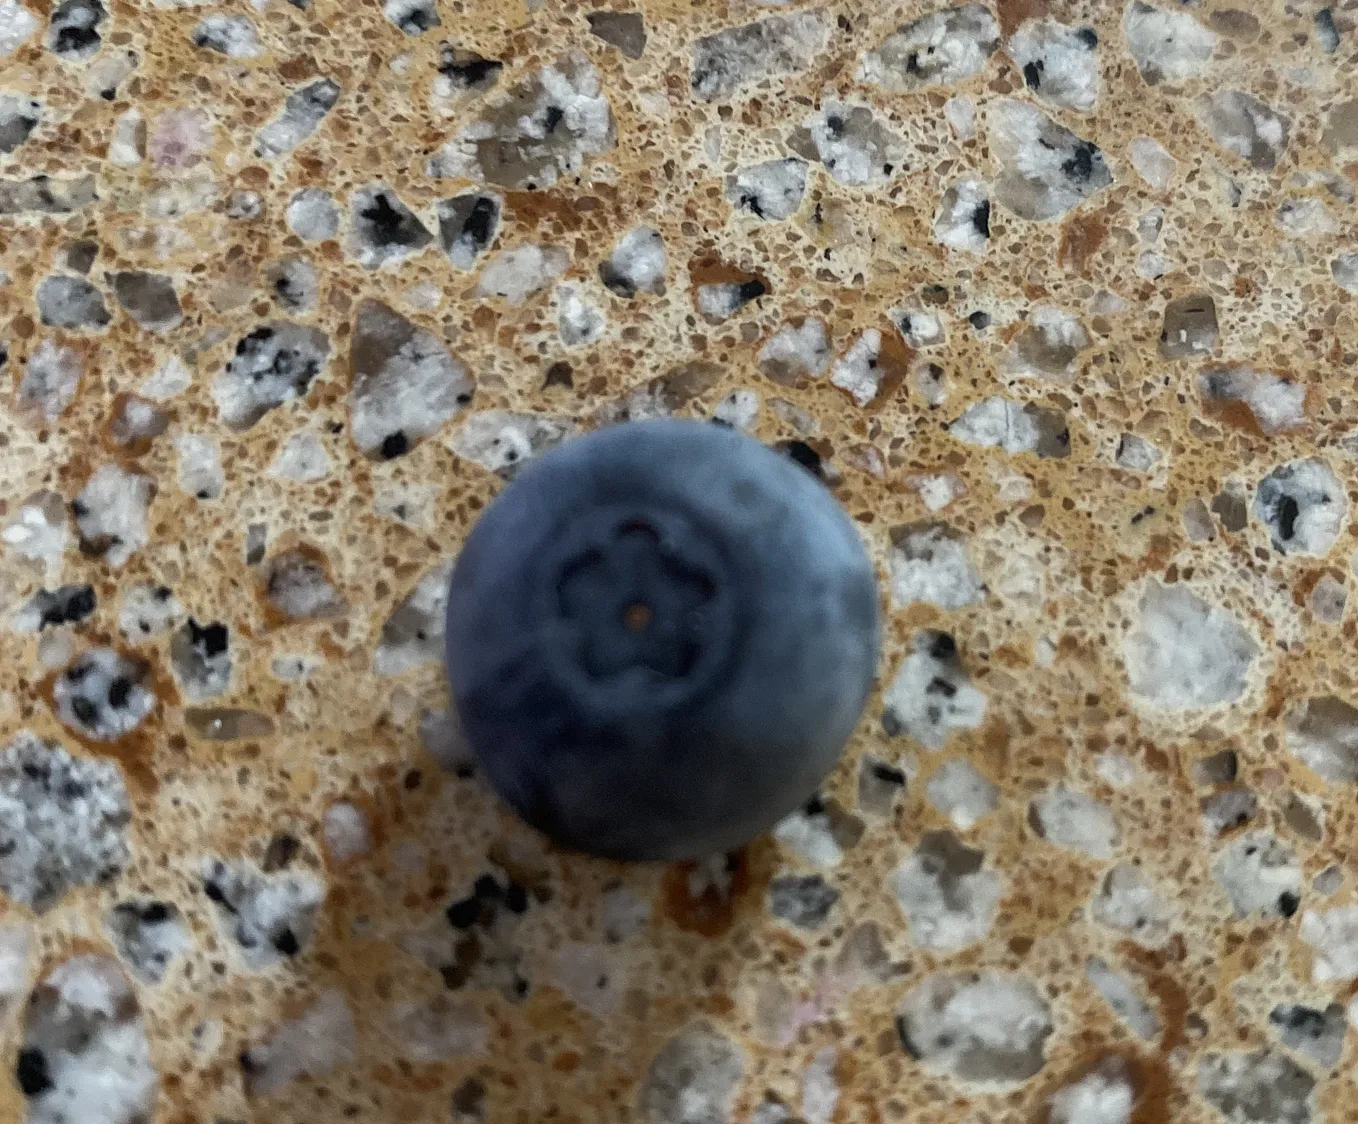 The First Blueberry Appears Right before My Eyes